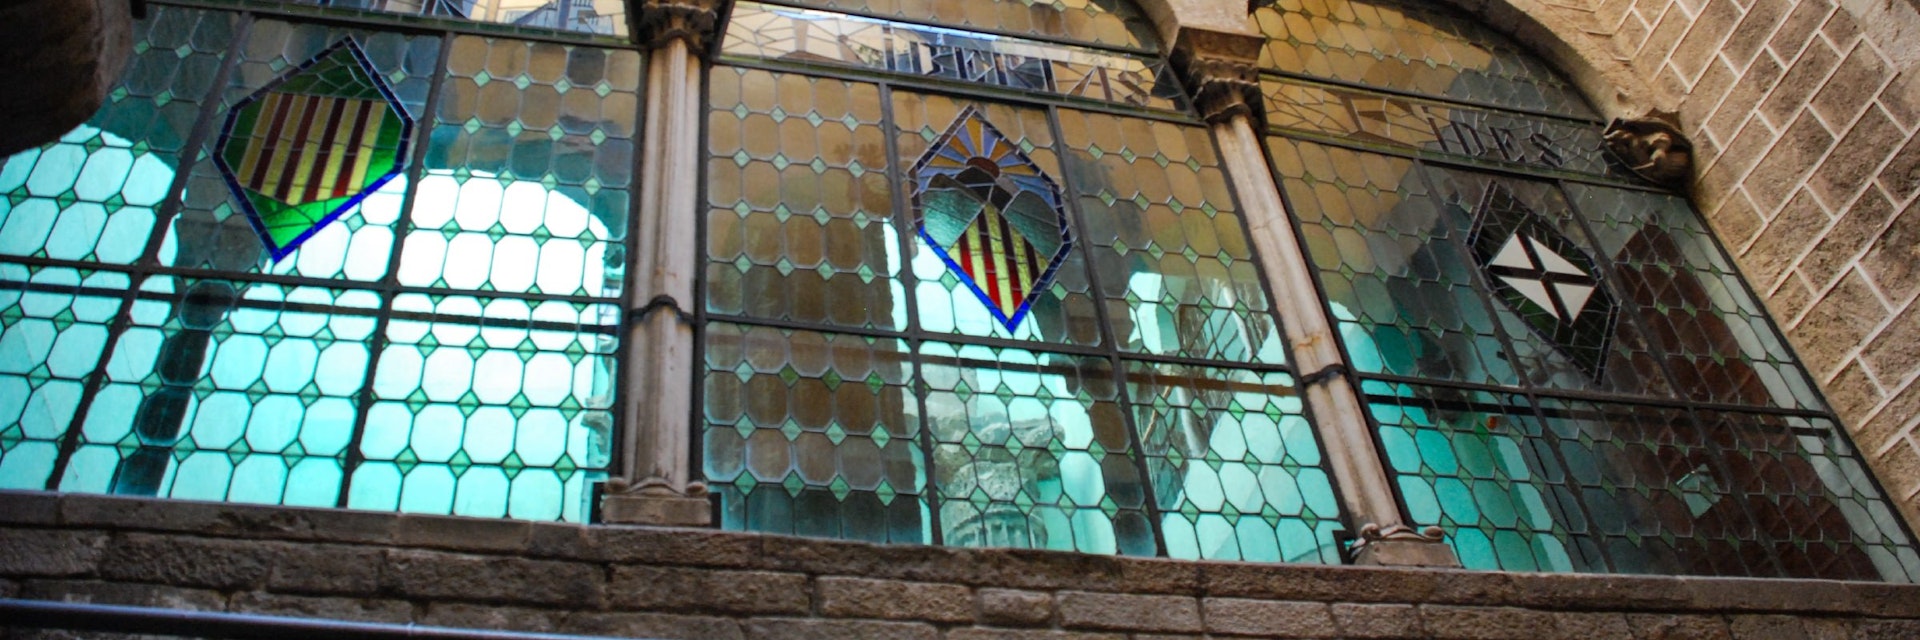 Stained glass window at Temple d’August